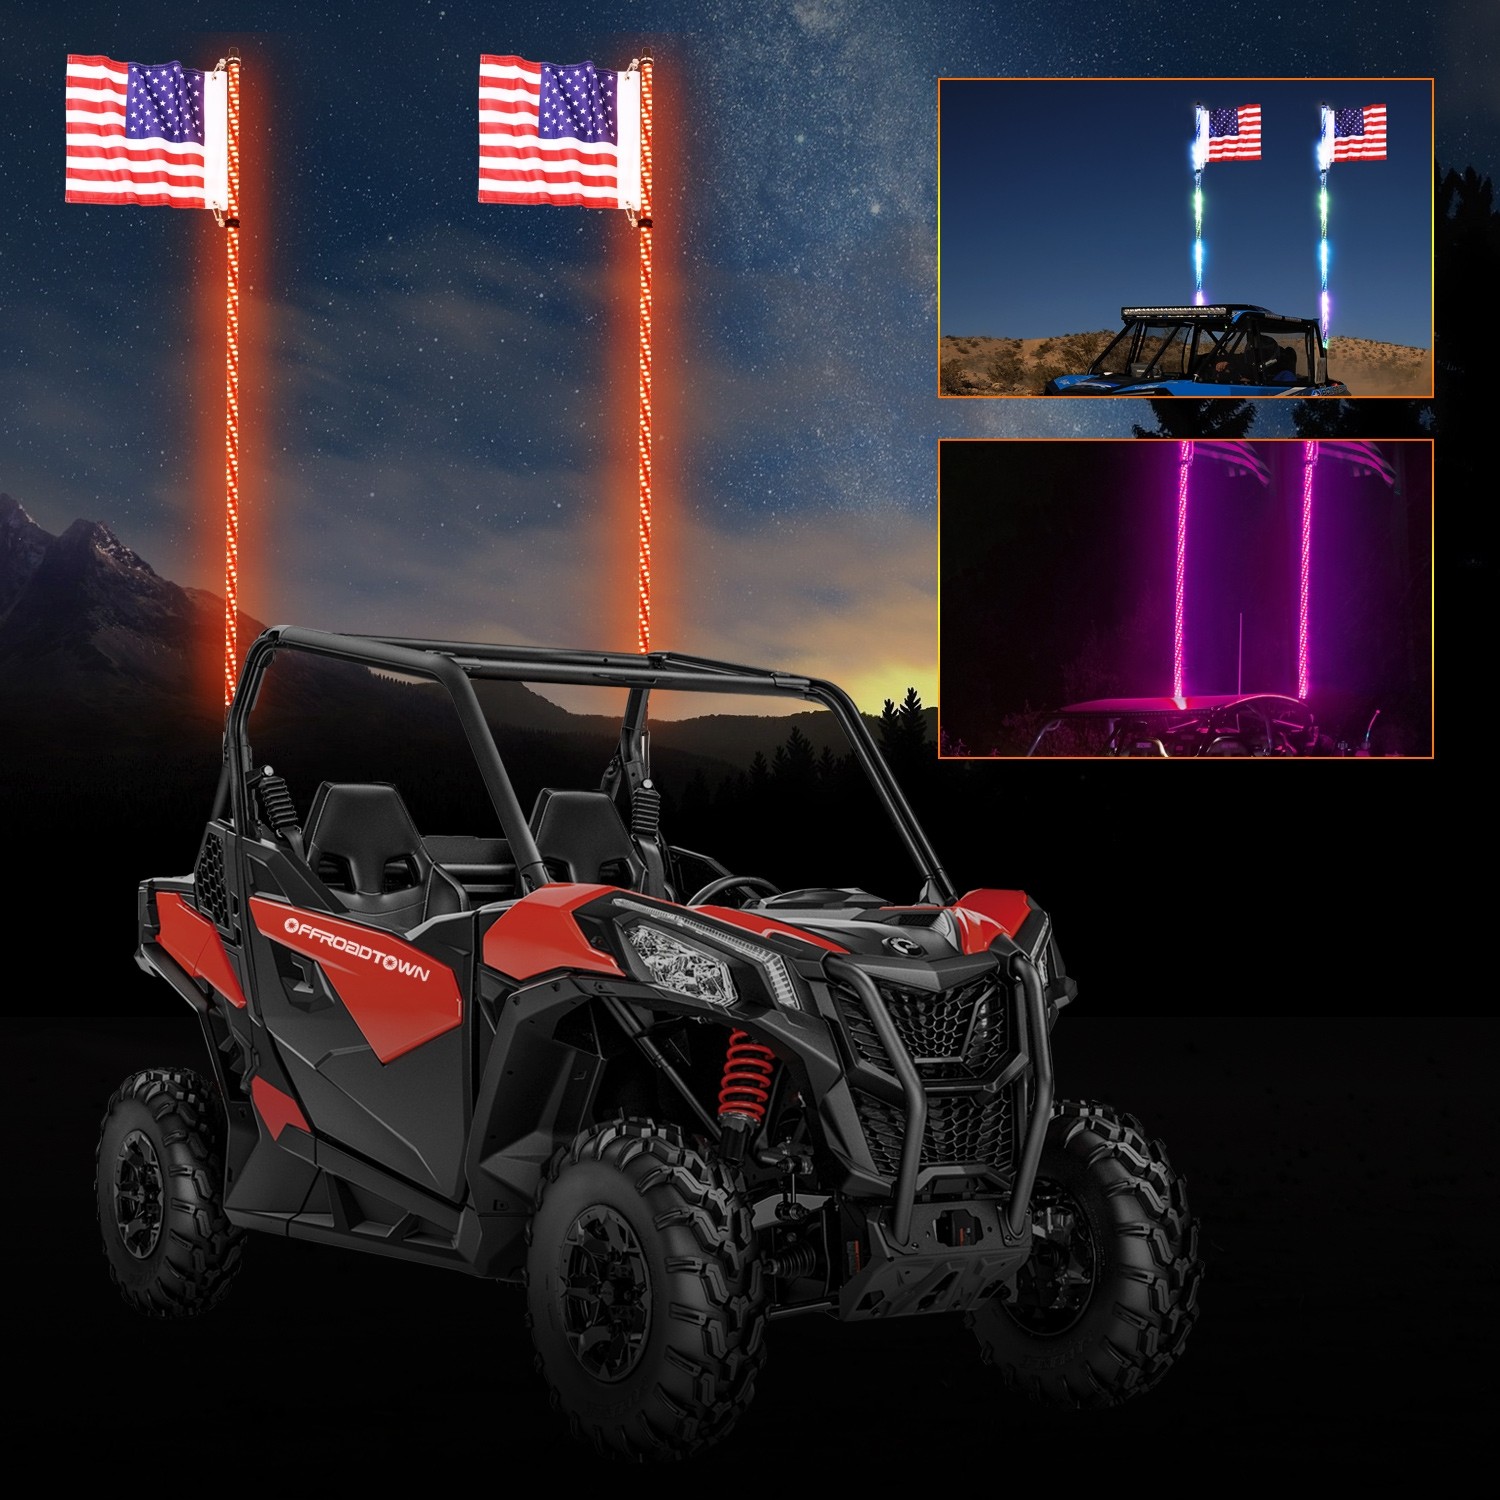 2pcs GTP 6ft Spiral LED Whip Lights 360° Twisted 20 Color RGB 21 Modes Lighted Whips Antenna W/Flag for UTV ATV Polaris RZR Quad Off Road Jeep Can-am Maverick Yamaha Sand Dune Buggy 4X4 